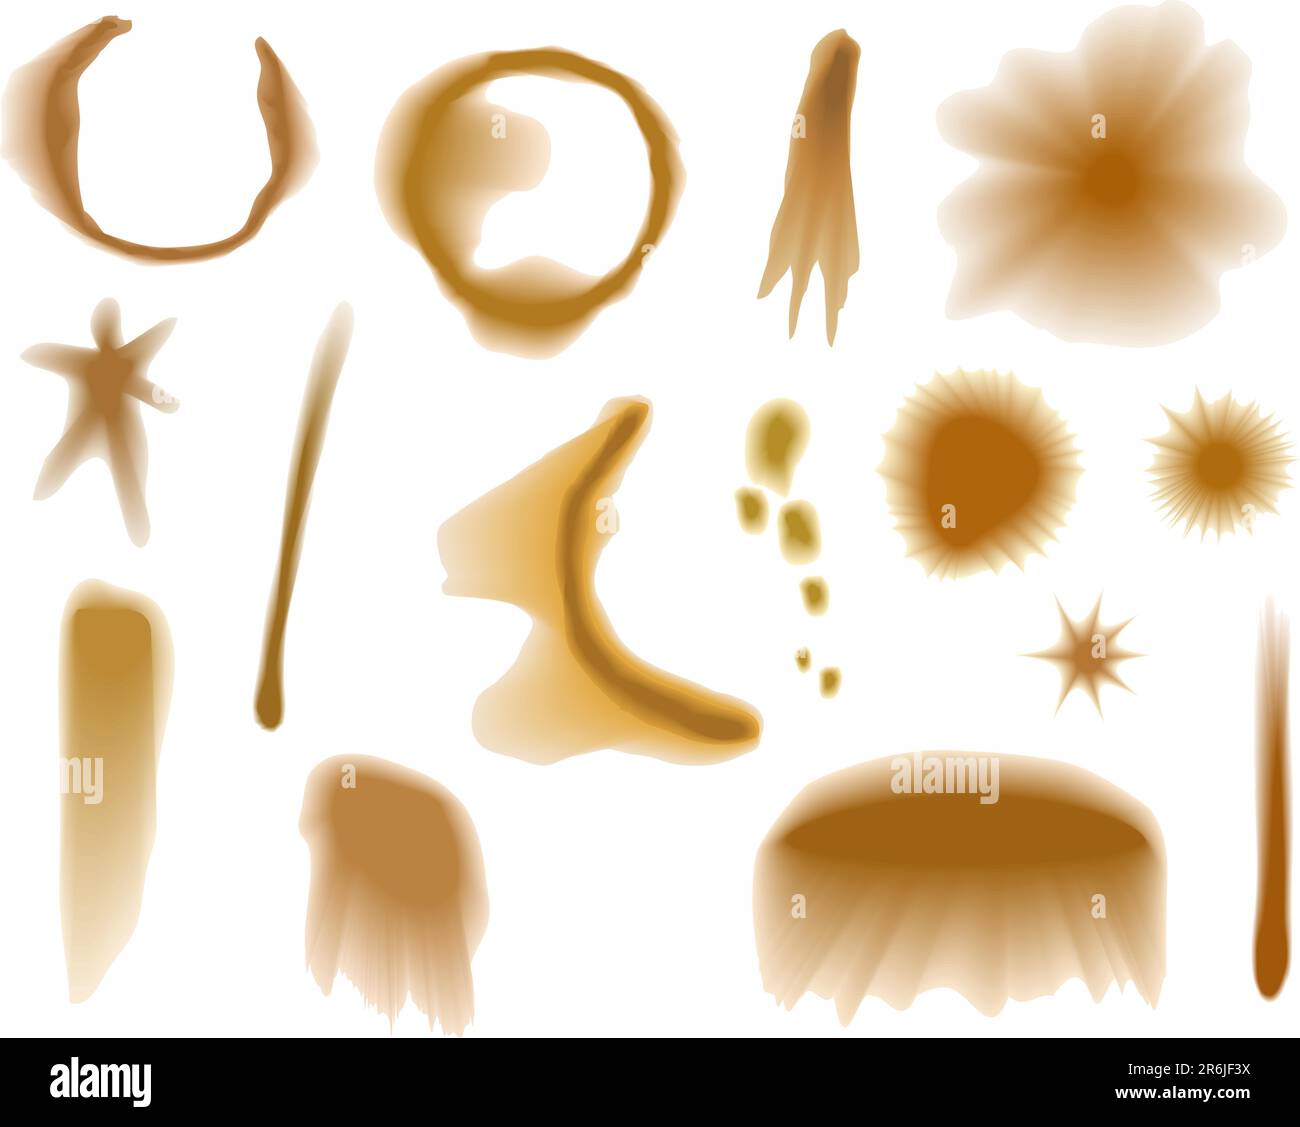 Vector designs of various tea and coffee spills and stains Stock Vector